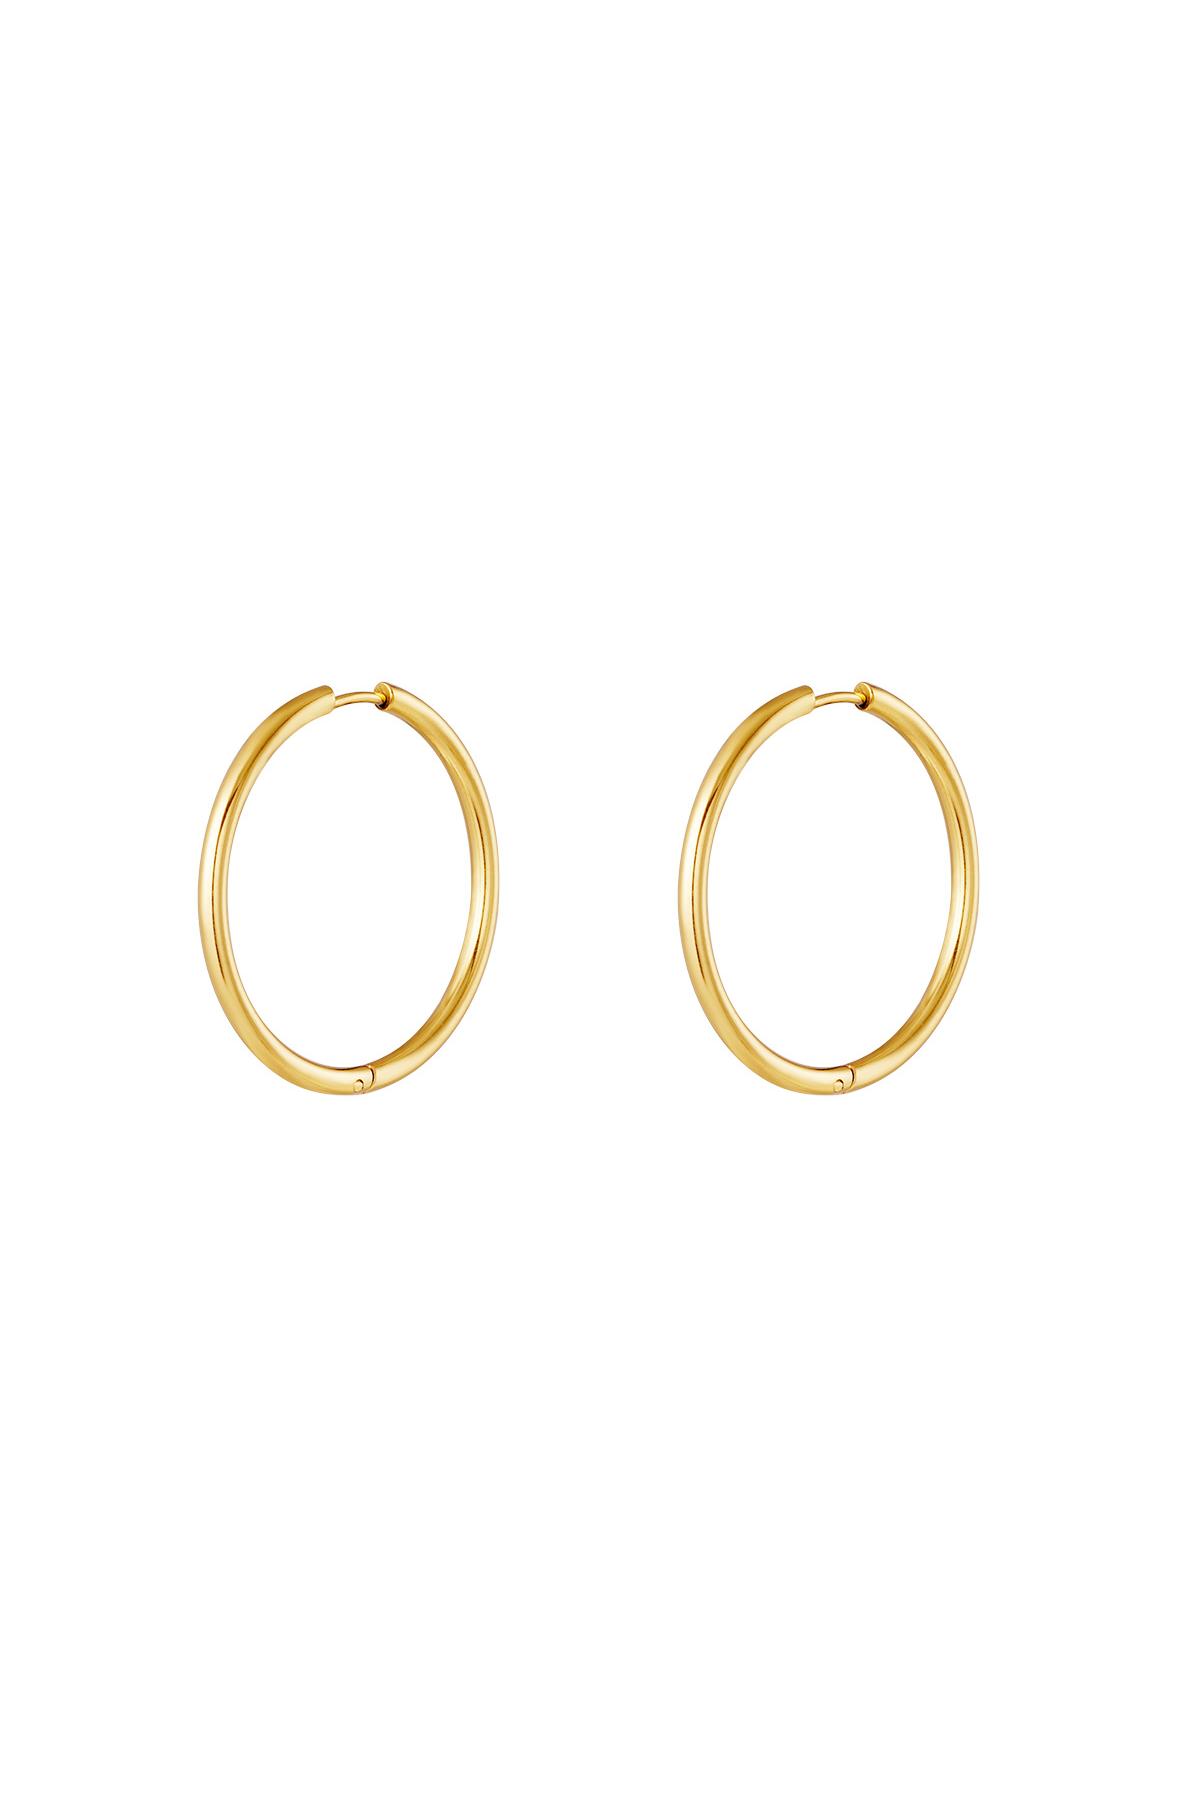 Stainless steel earrings hoops small Gold h5 